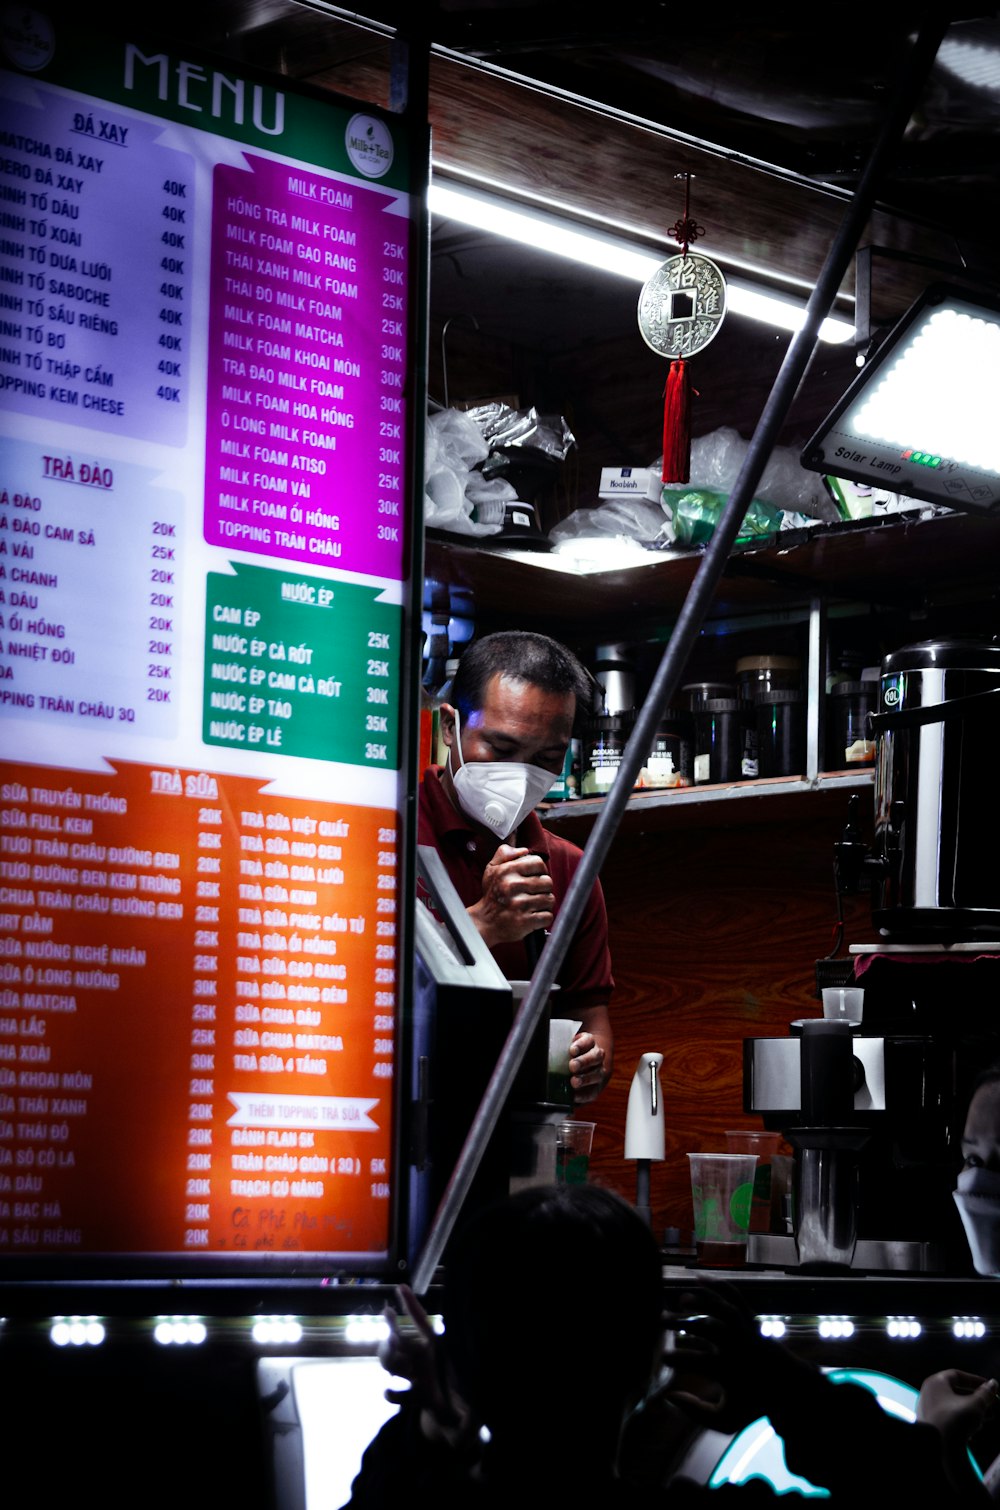 a man standing in front of a menu in a restaurant